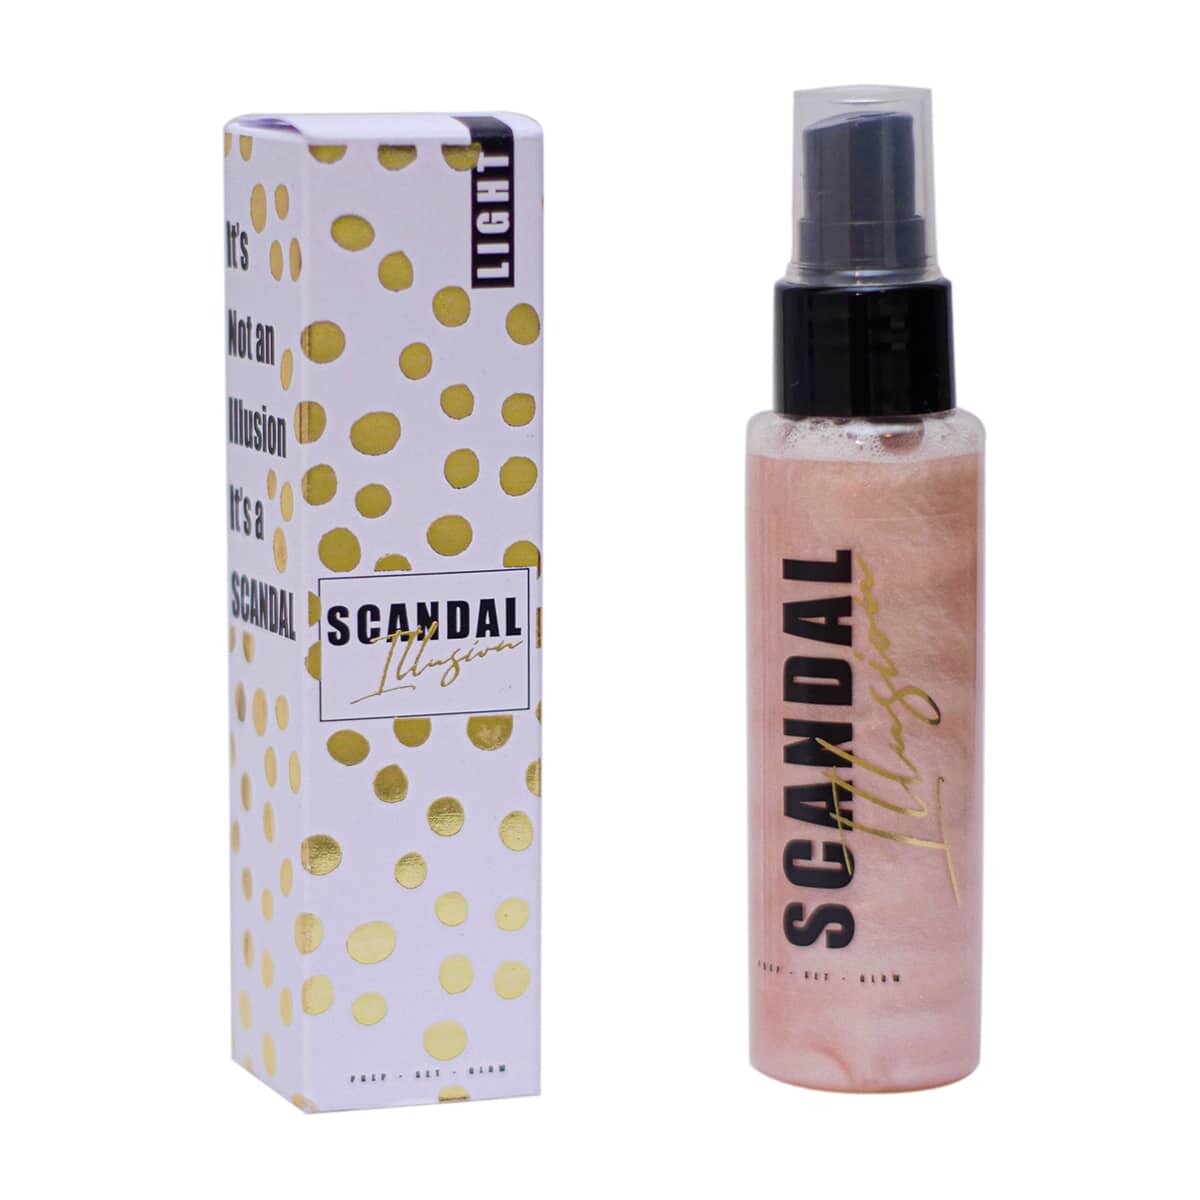 Scandal Beauty-Light face setting spray with shine